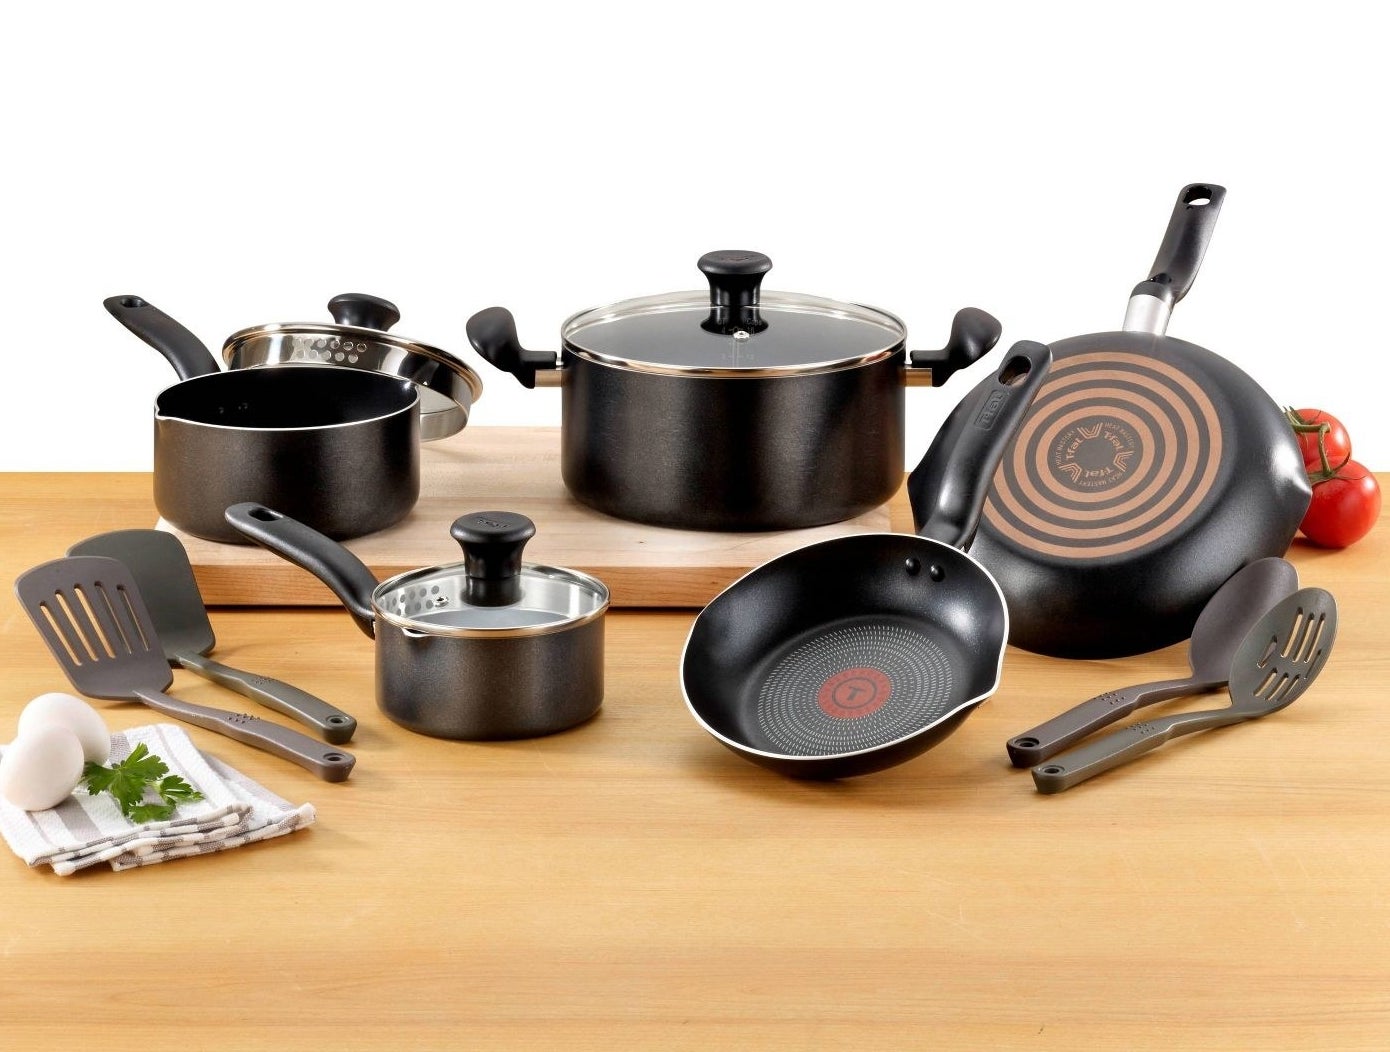 The cookware set